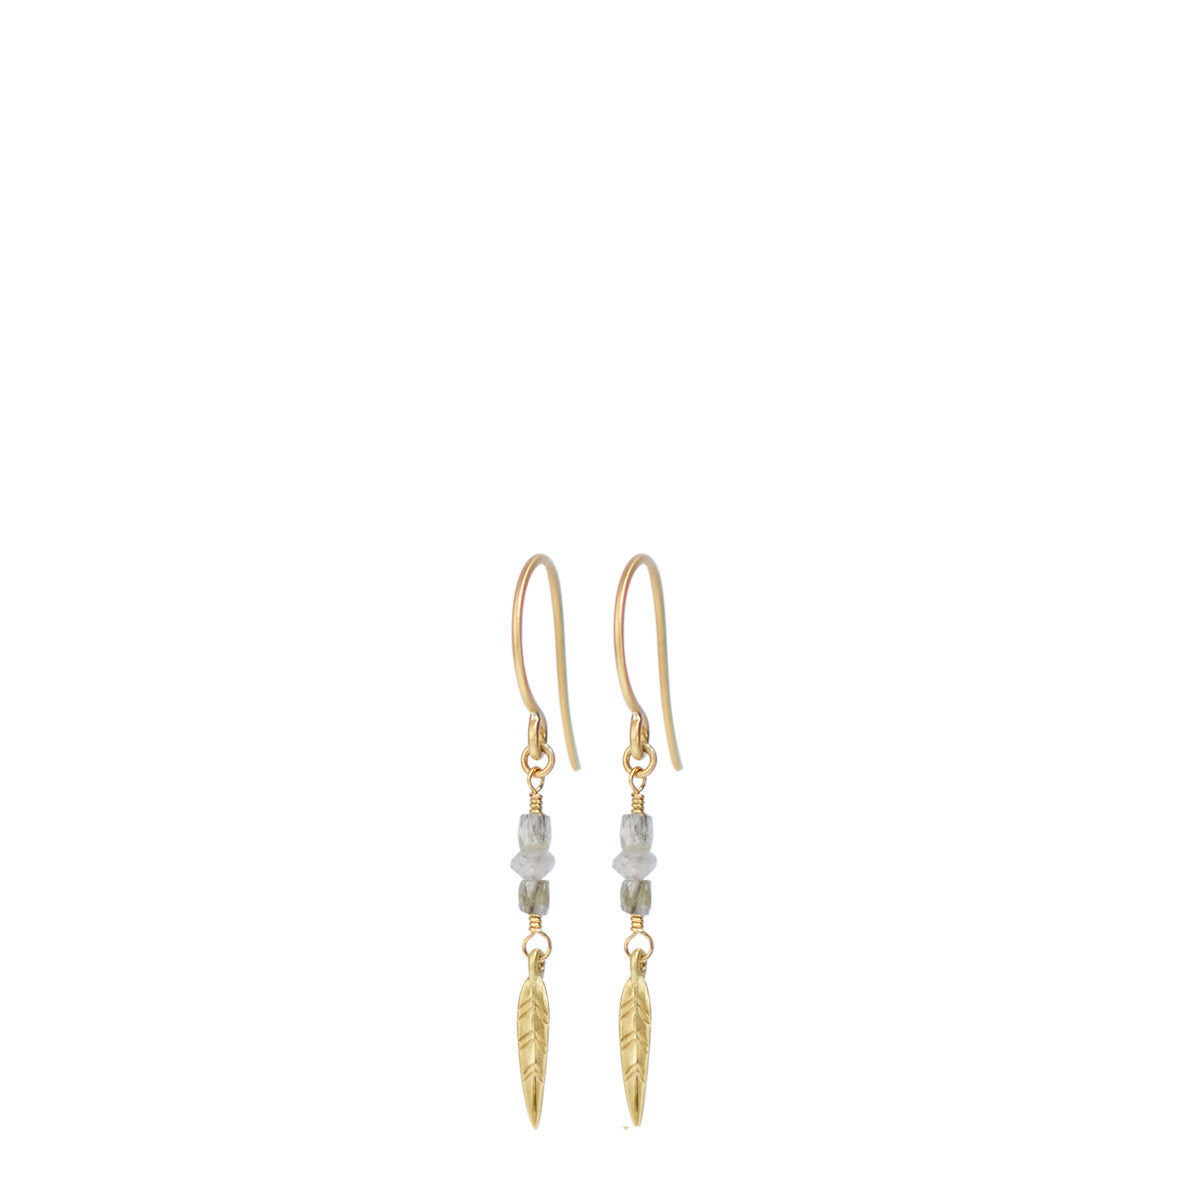 18K Gold Short Grey Diamond Earrings with Feathers